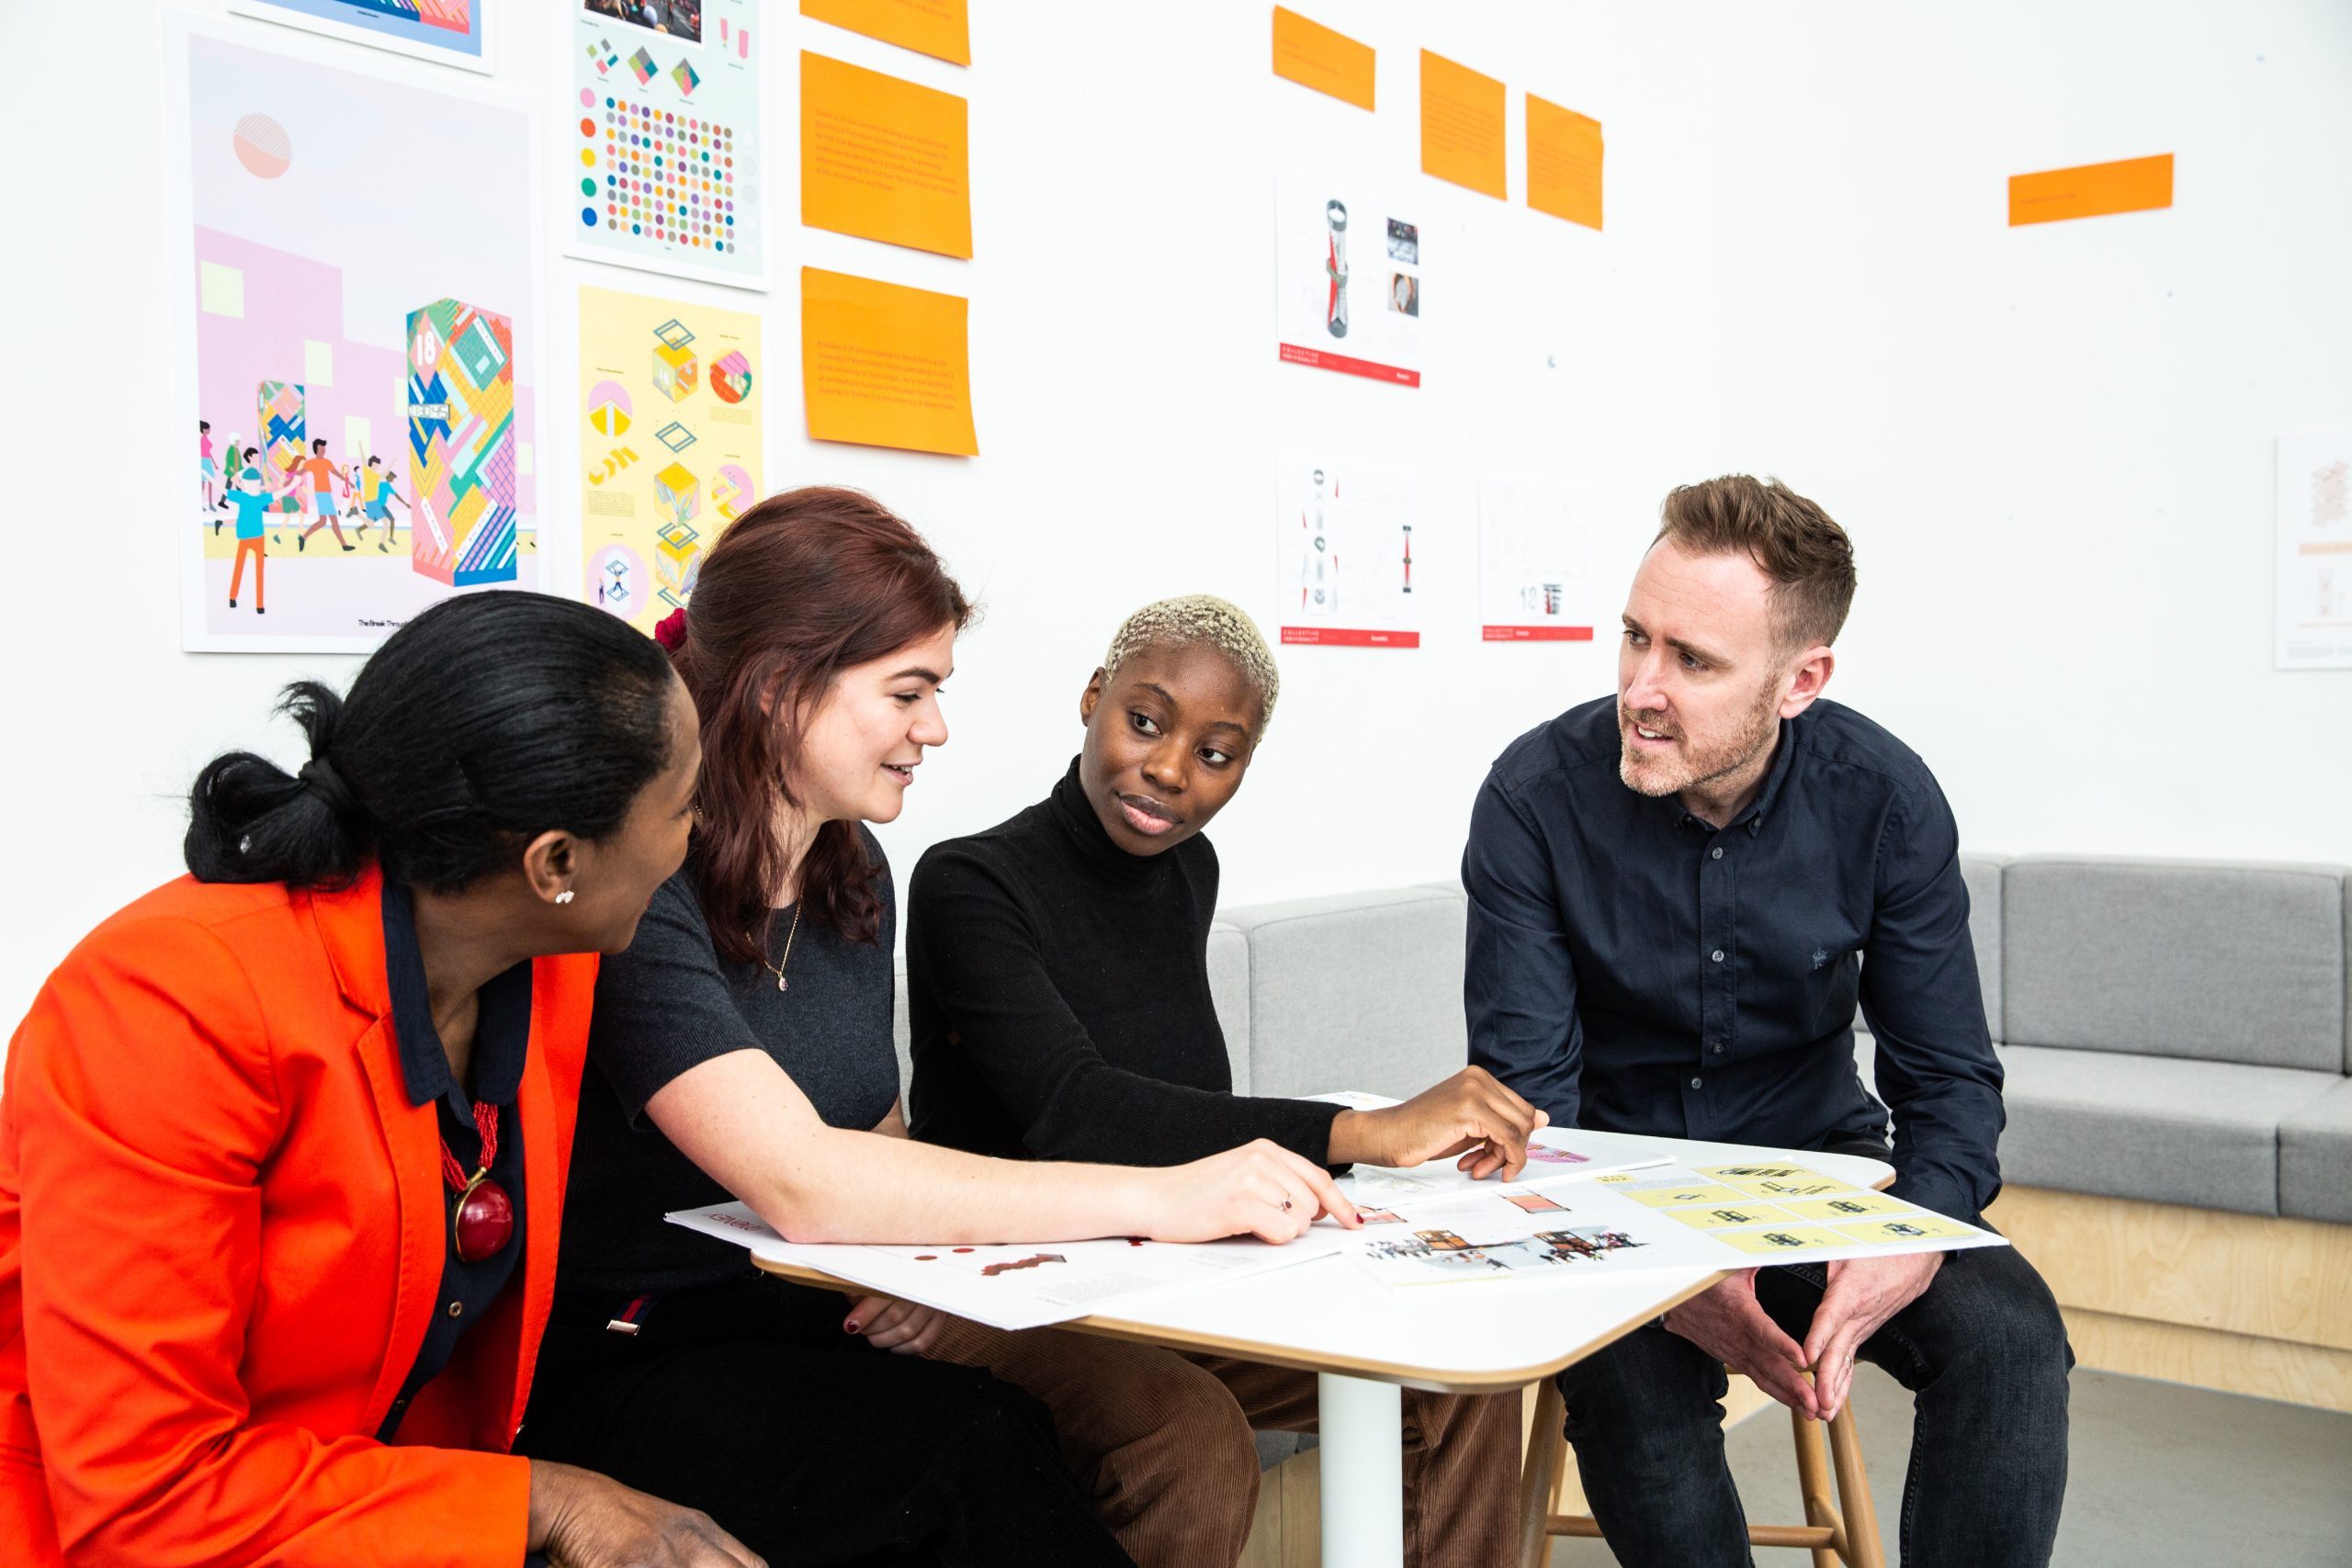 Sonia Watson, CEO of the SLCT, and Mark Nagle, Operations Director at urban, at Your Space in Deptford to mark the launch of our joint #BeMoreInclusive programme. Blog - Architects' Journal Race Diversity Survey.